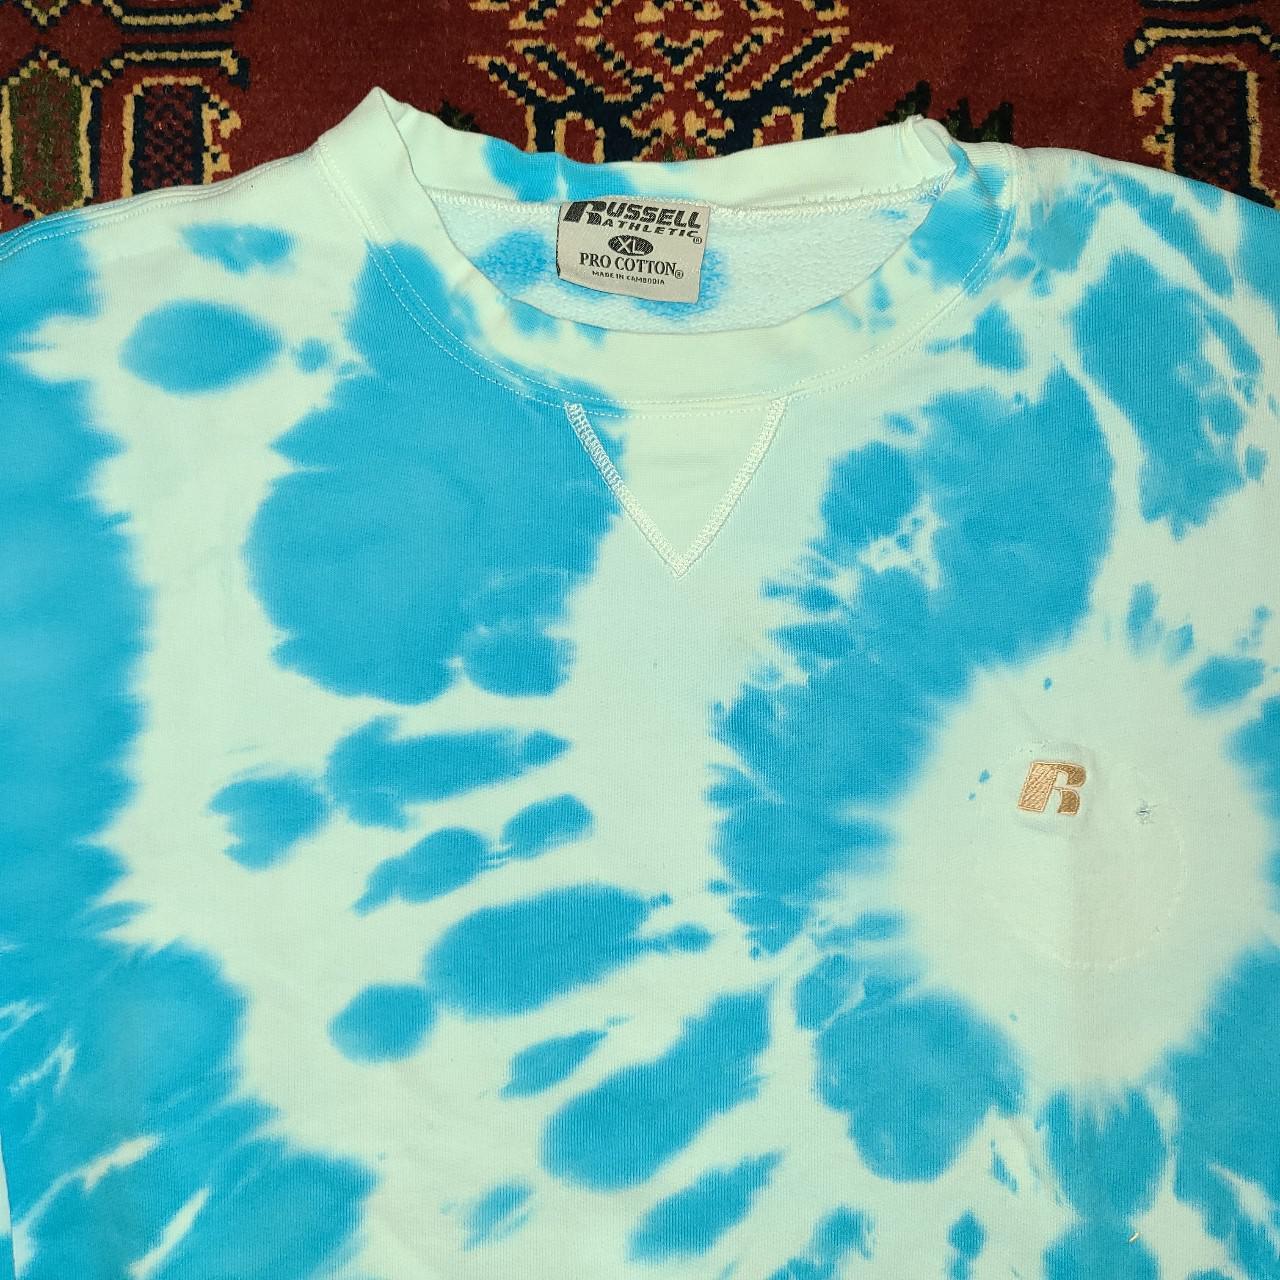 Product Image 4 - Vintage tie dye Russell Pro